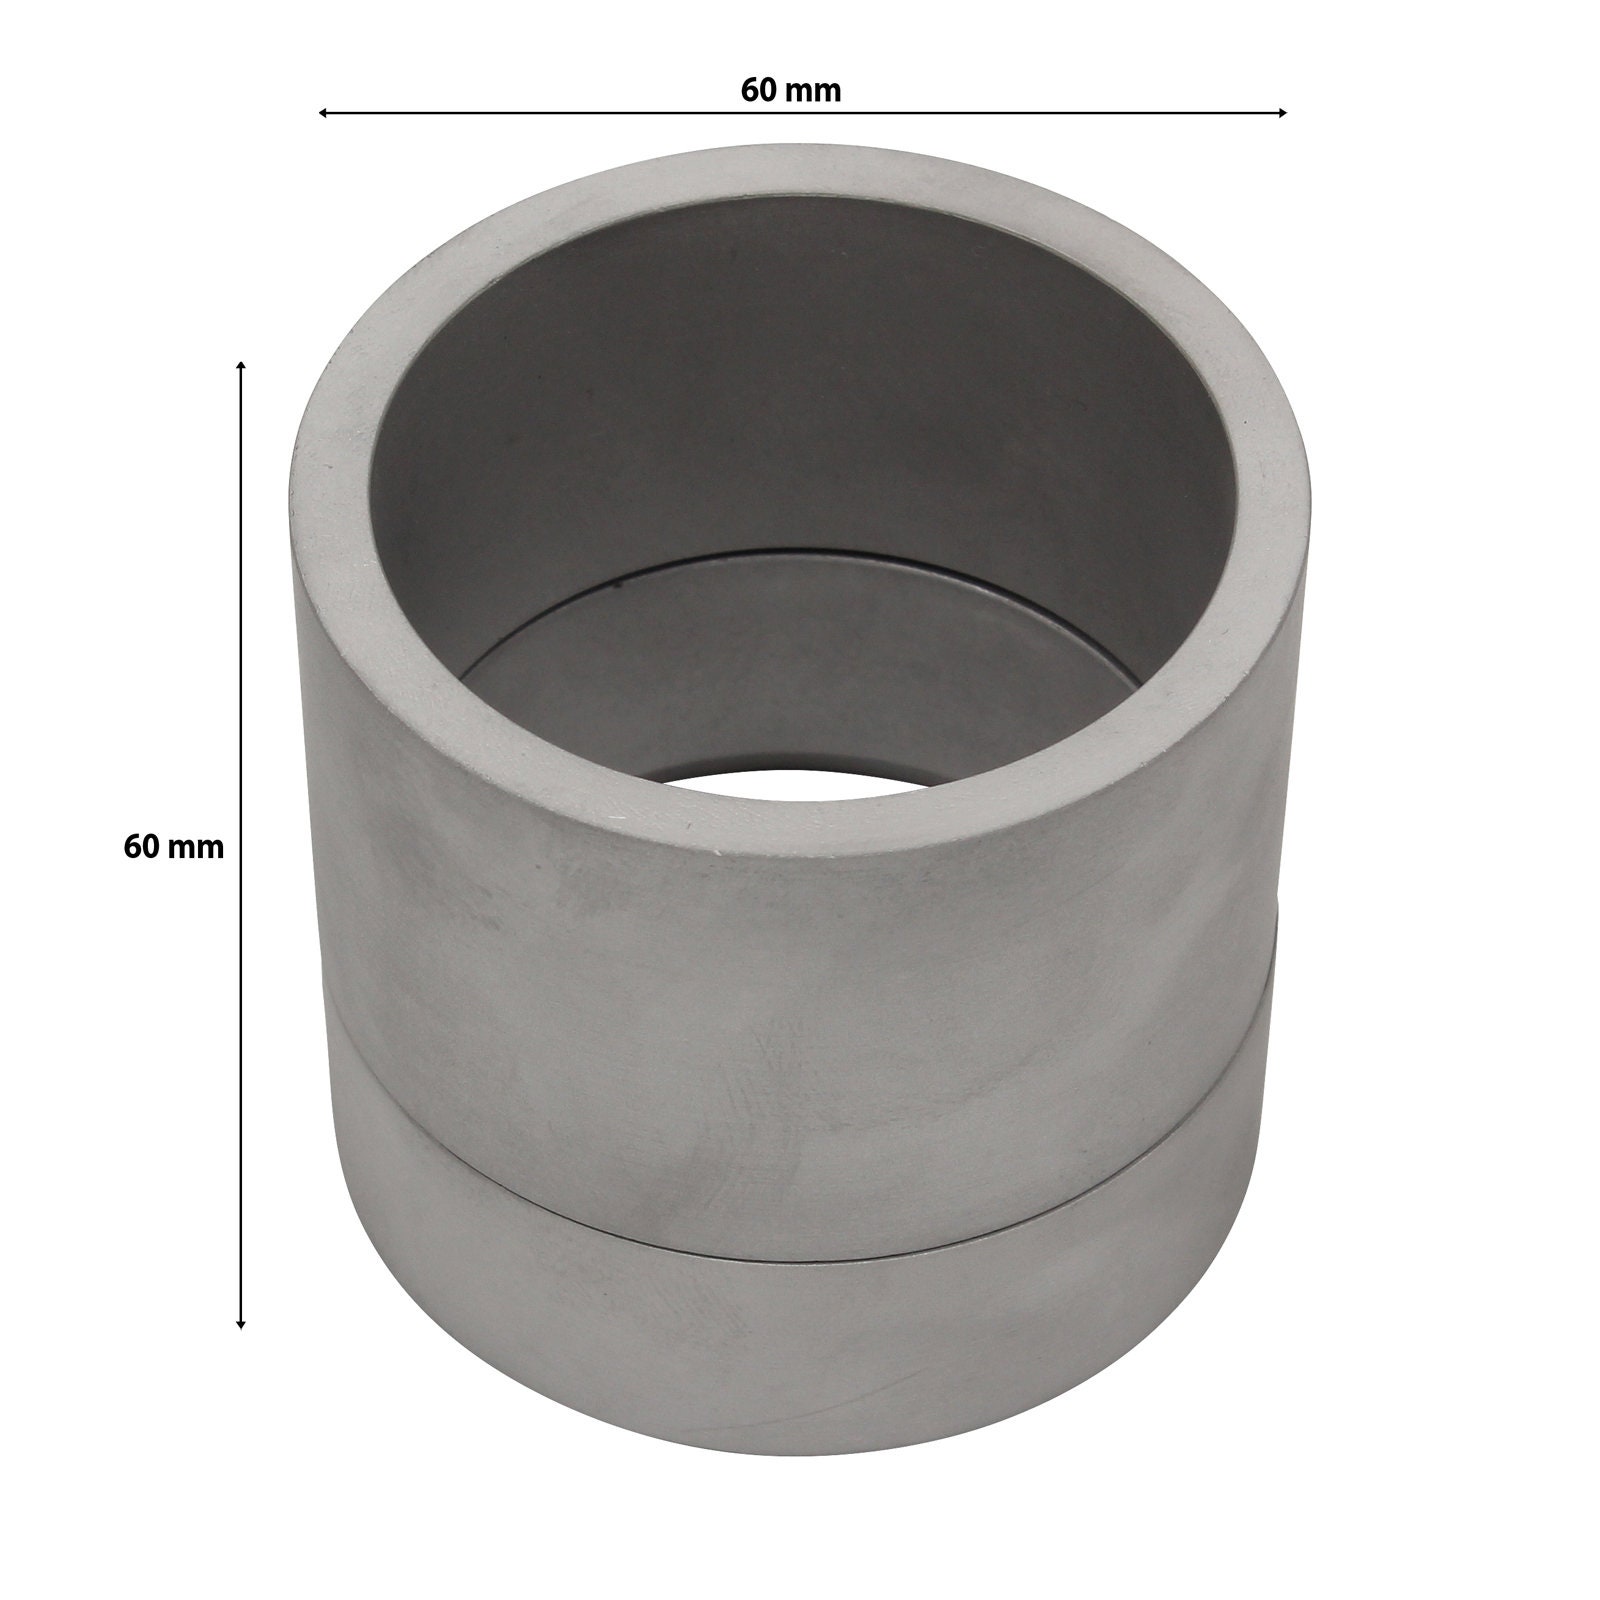 Mold Rings For Delft Clay Sand Casting 60 MM Aluminum 2 Part